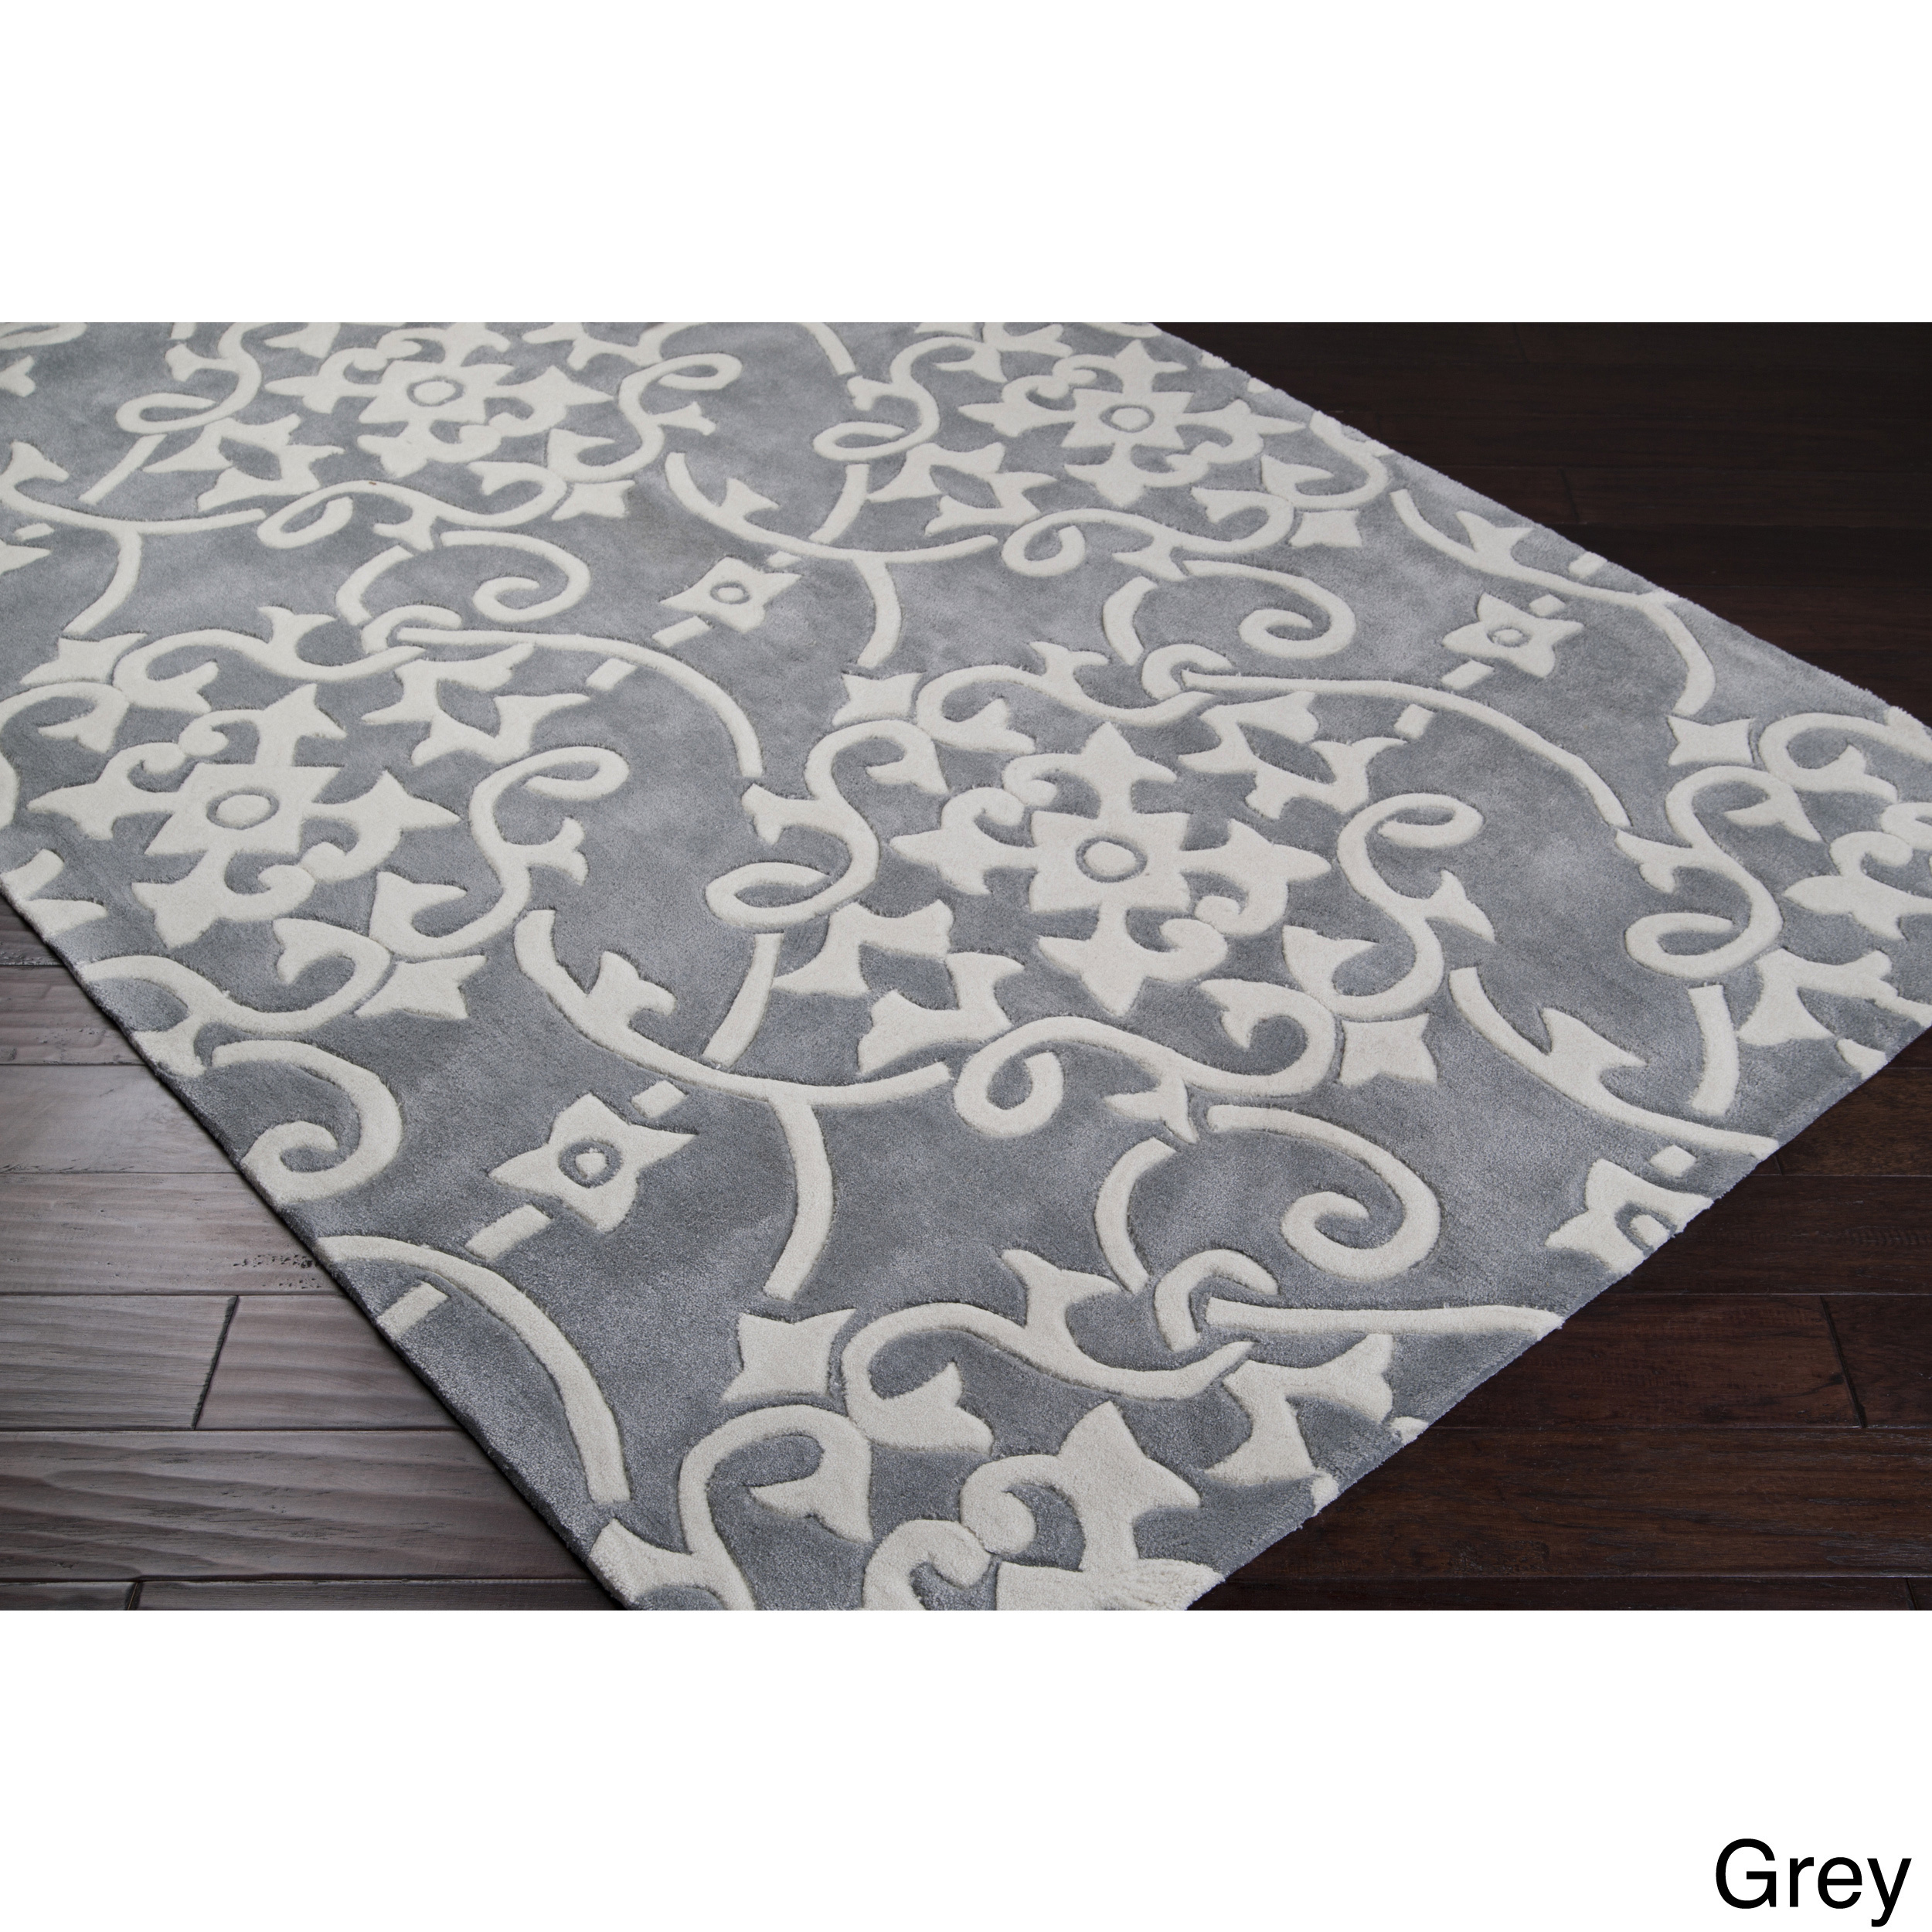 Surya Carpet, Inc. Hand tufted Floral Contemporary Area Rug (8 X 11) Beige Size 8 x 11